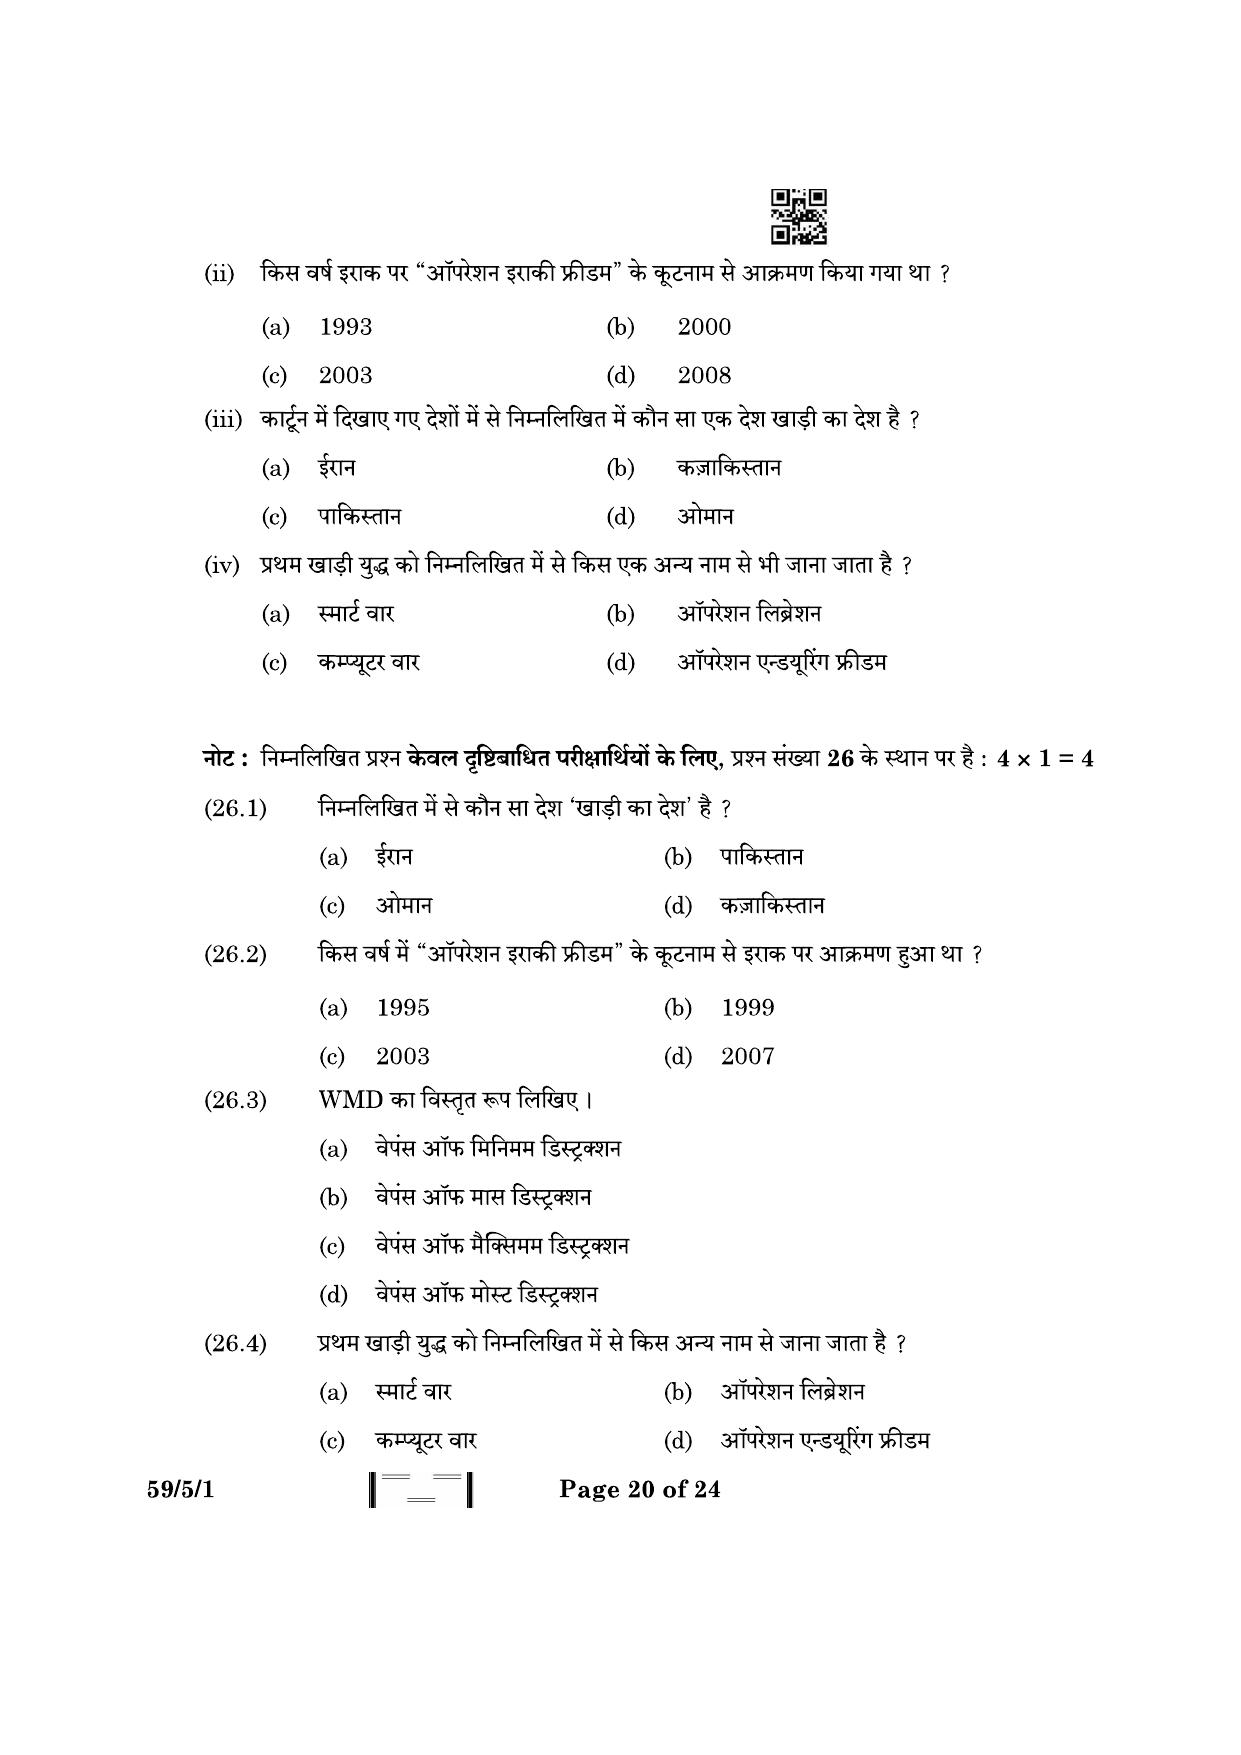 CBSE Class 12 59-5-1 Political Science 2023 Question Paper - Page 20